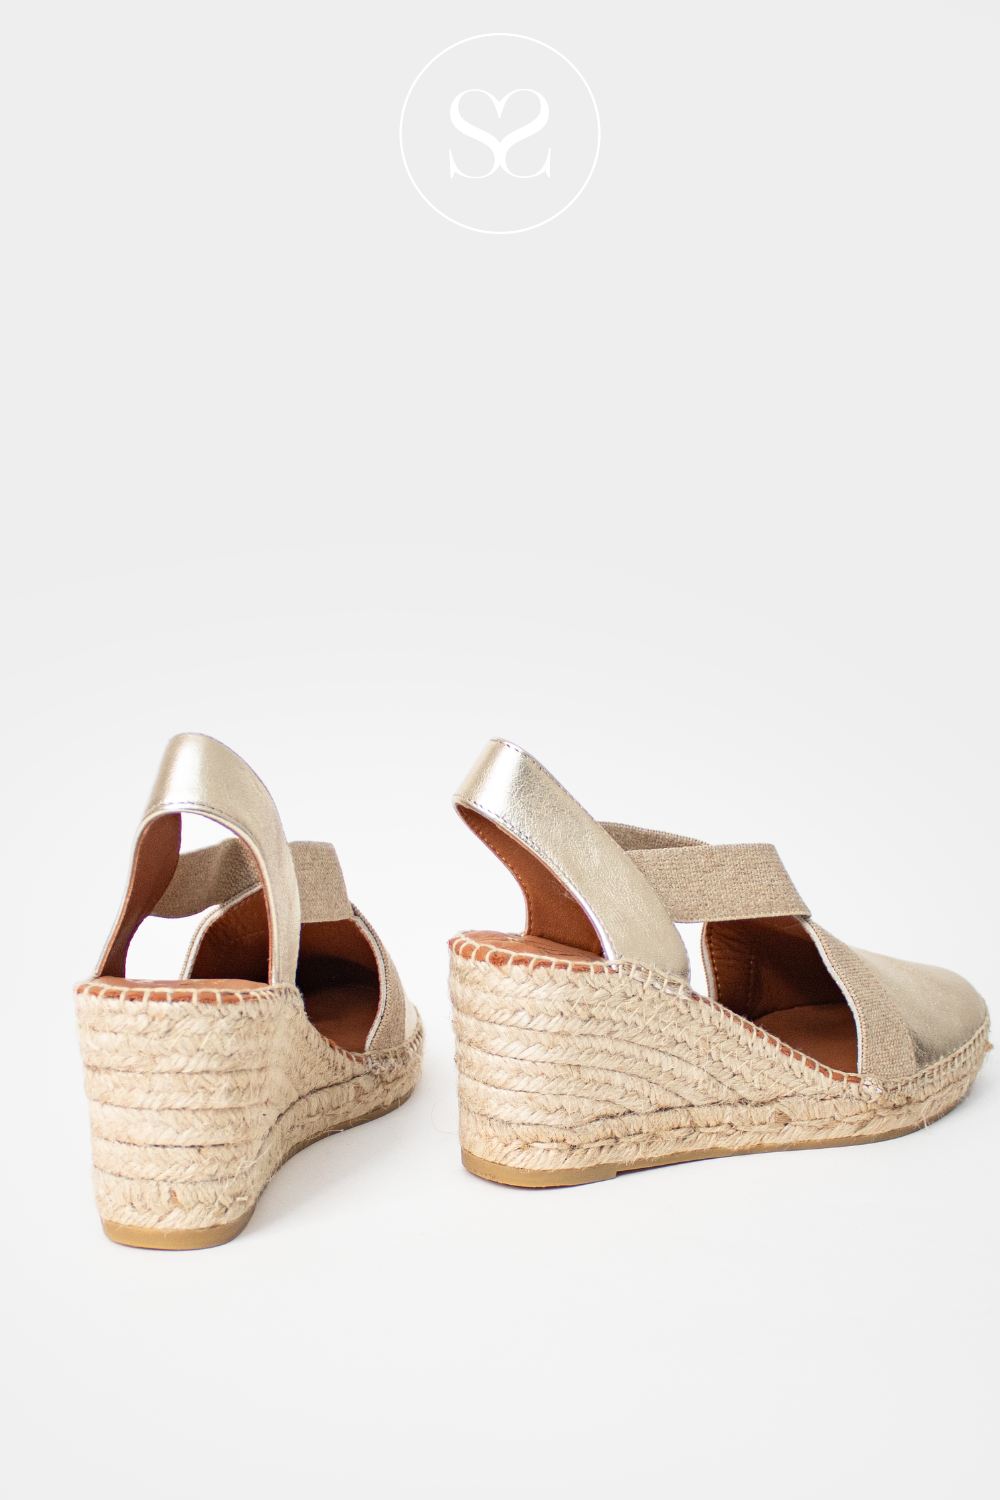 VIGUERA GOLD WEDGE ESPADRILLE SHOES. CLOSED TOE FRONT AND EXPOSED HEEL. SLIP ON SHOE WITH ELASTICATED CROSS FRONT.